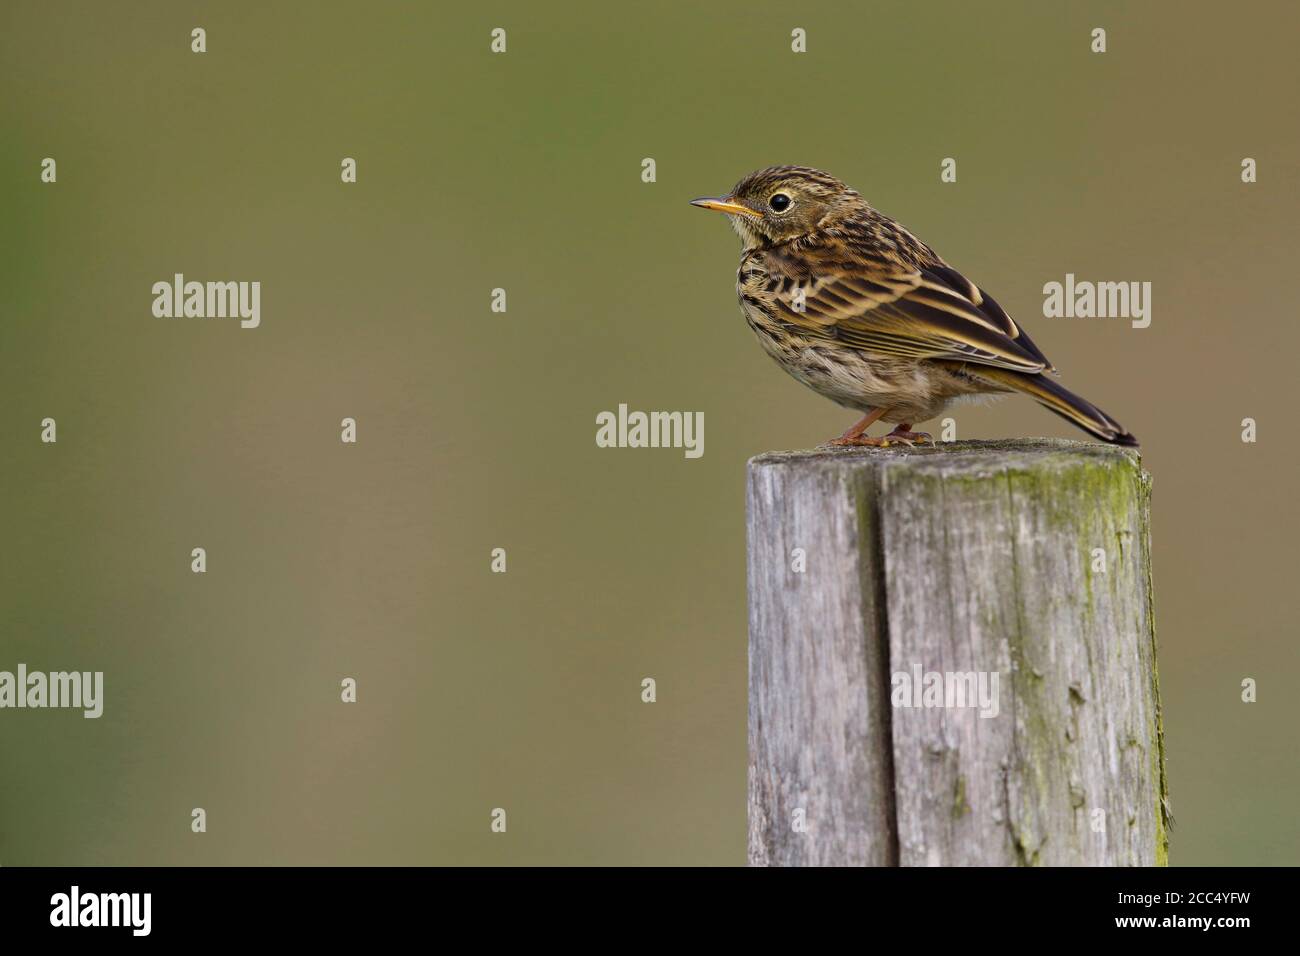 Meadow Pipit (Anthus pratensis), Juvenile standing on a wooden pole, Netherlands, Hoogland Stock Photo